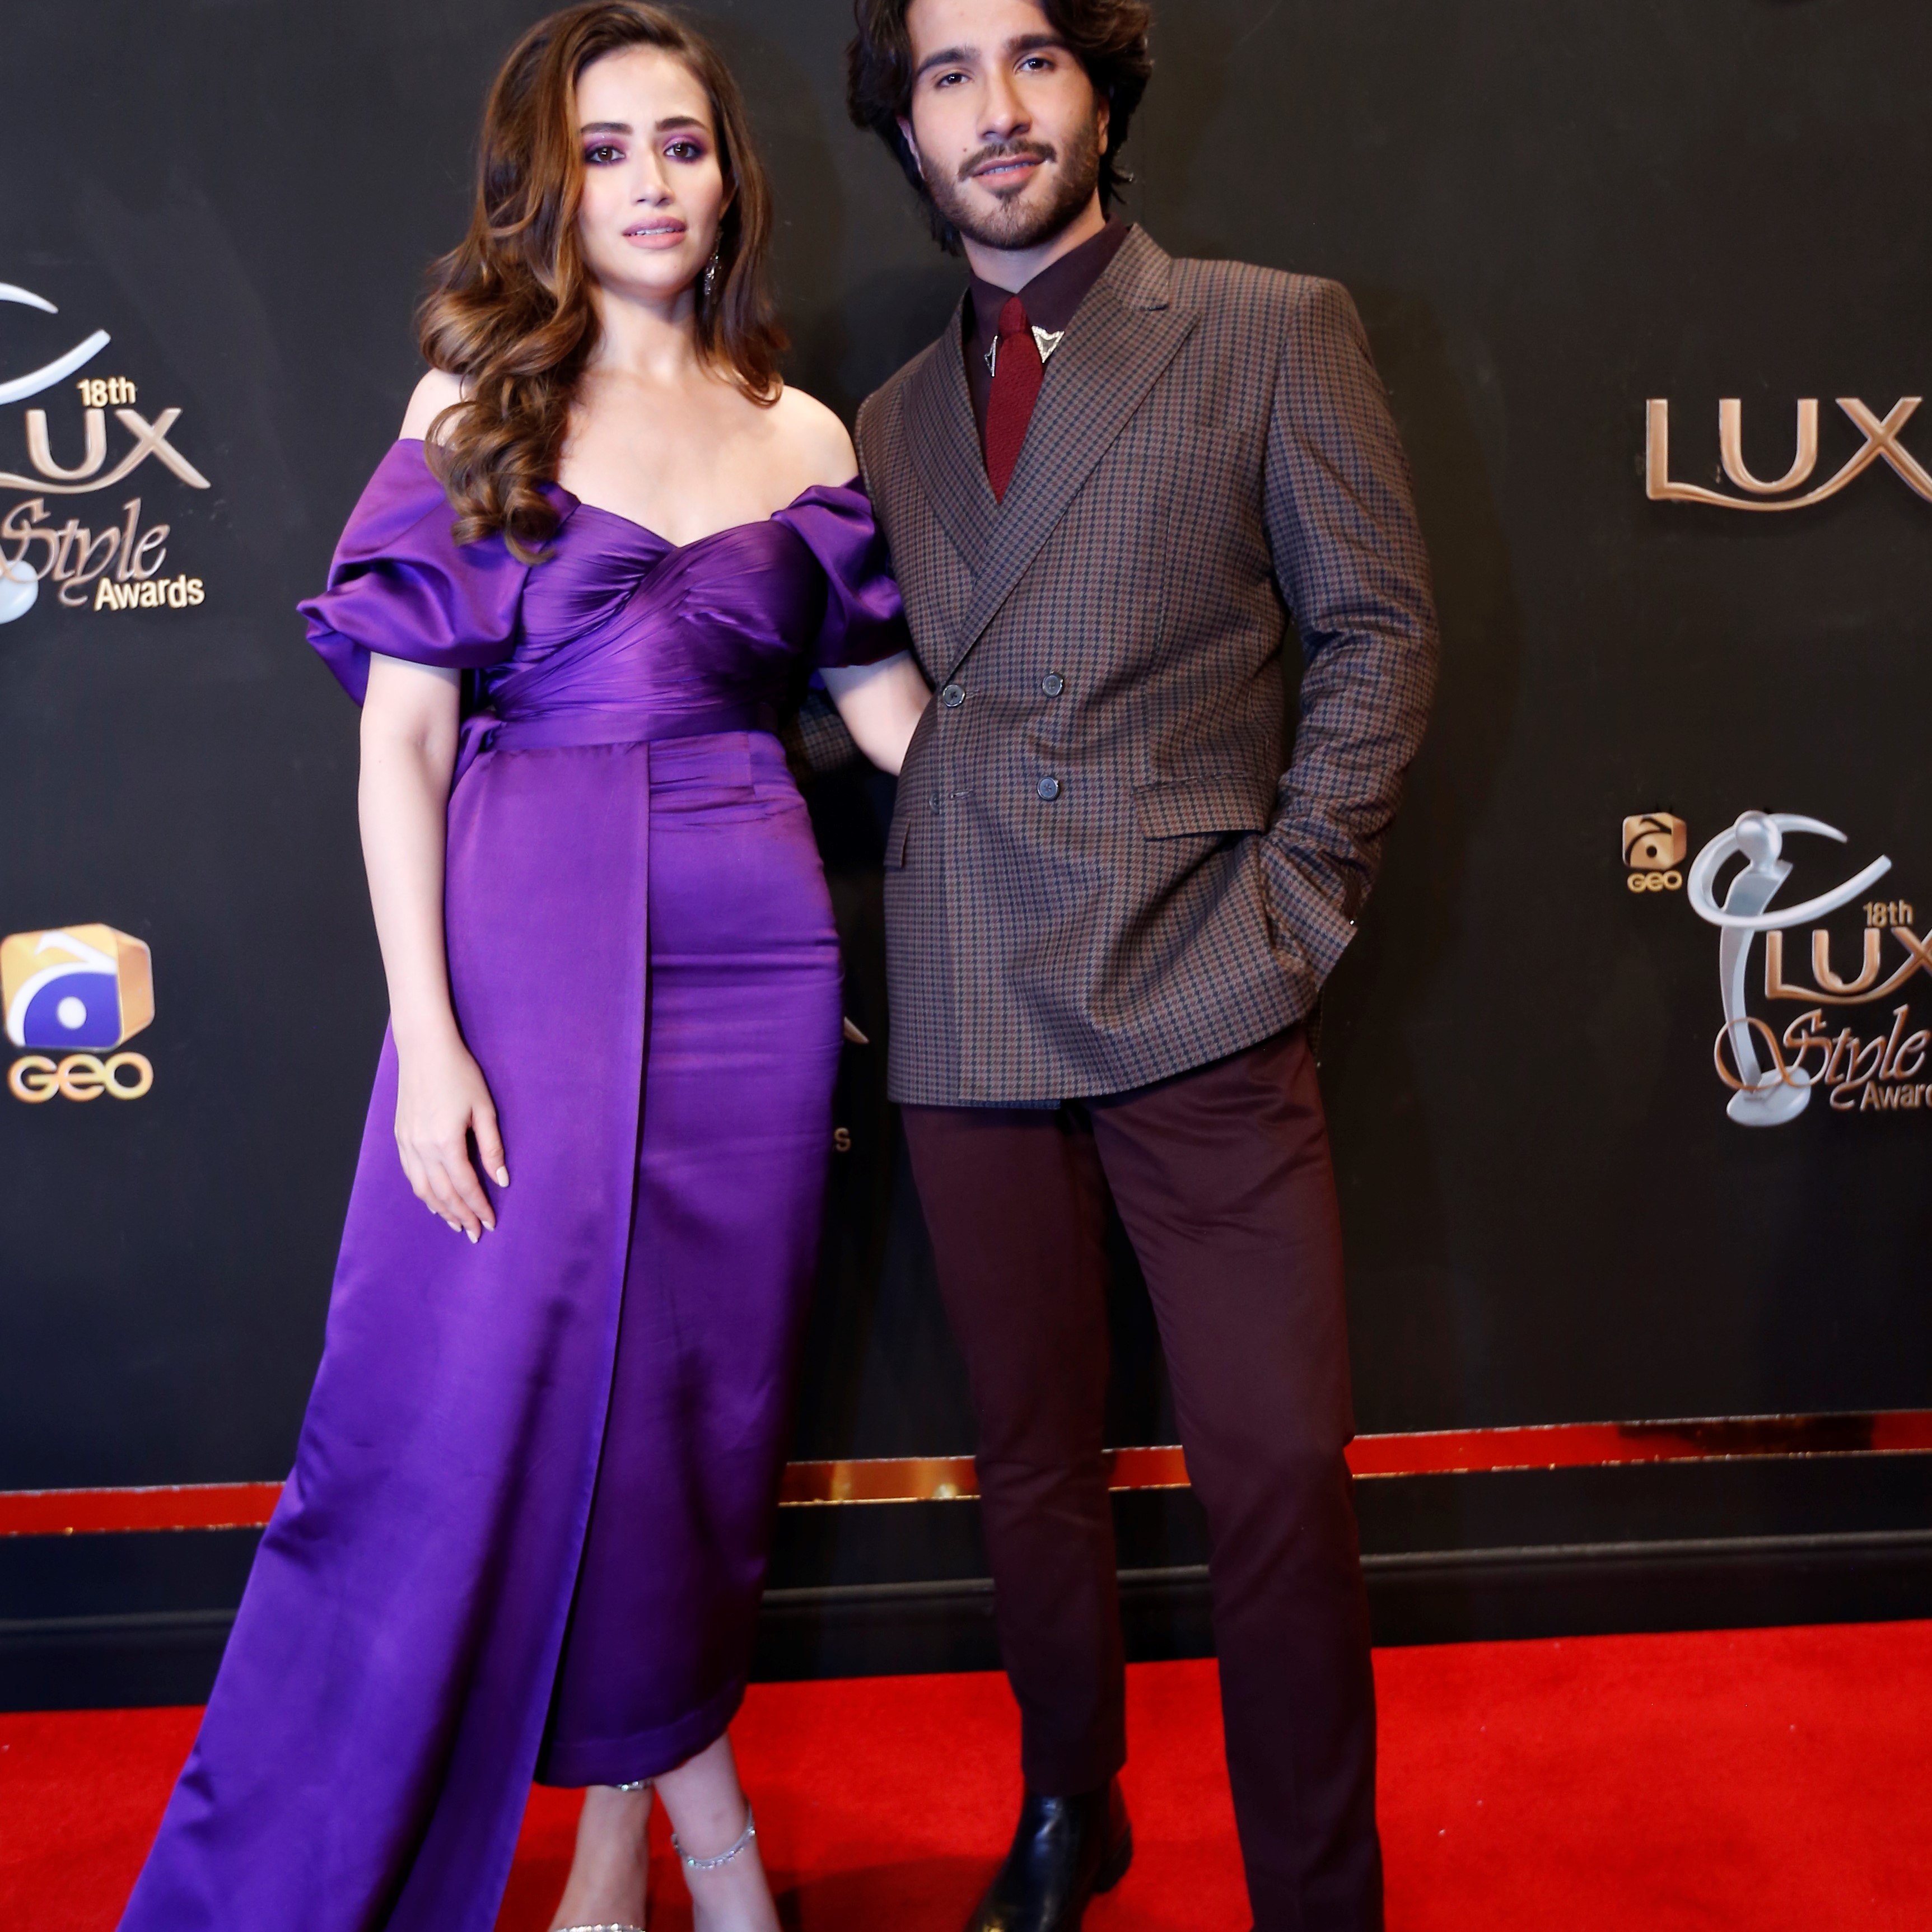 lux style awards